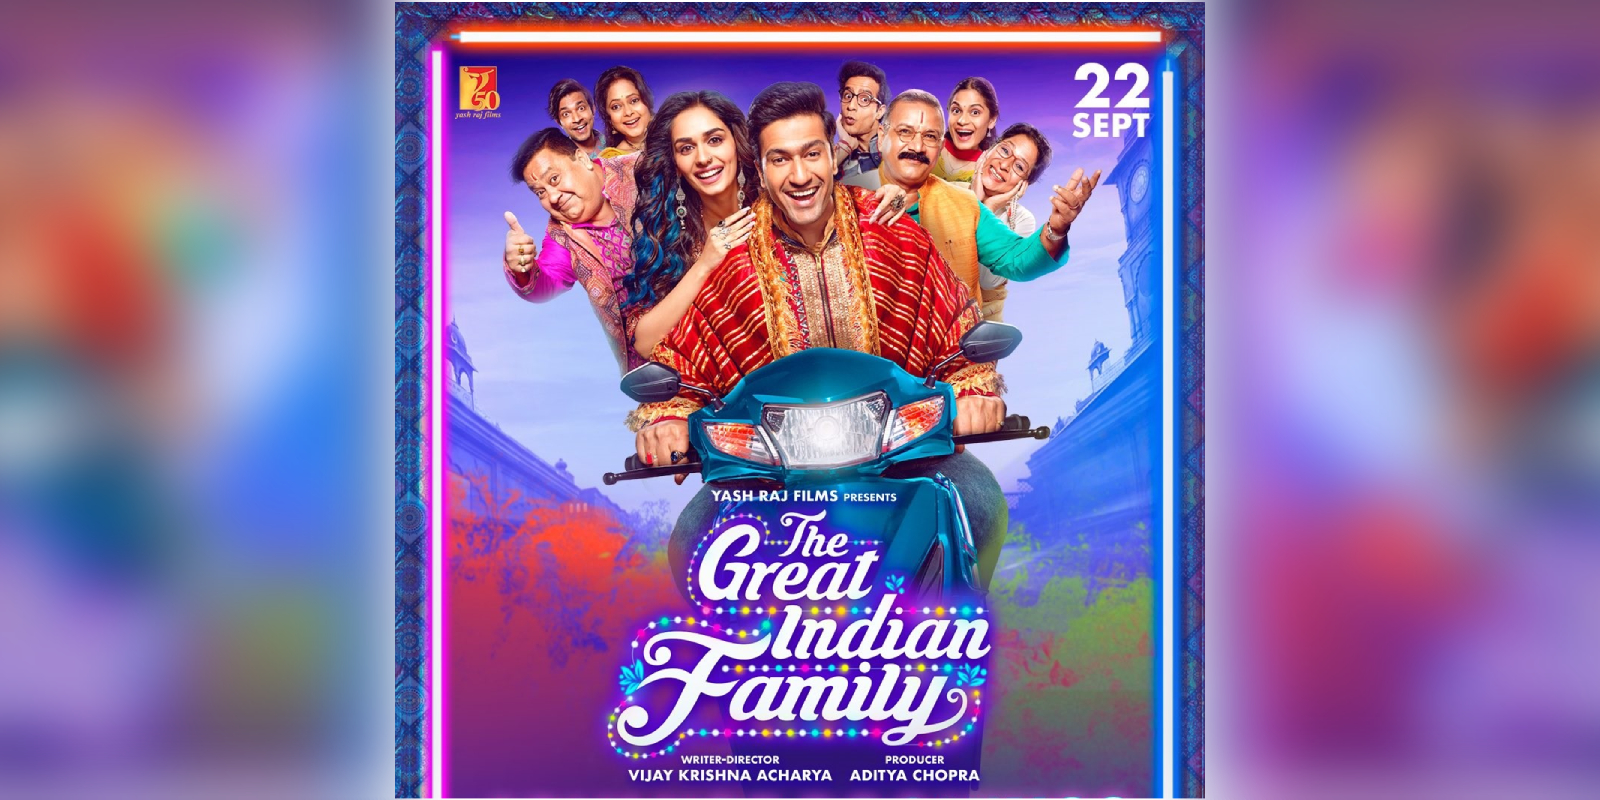 A poster of the film The Great Indian Family